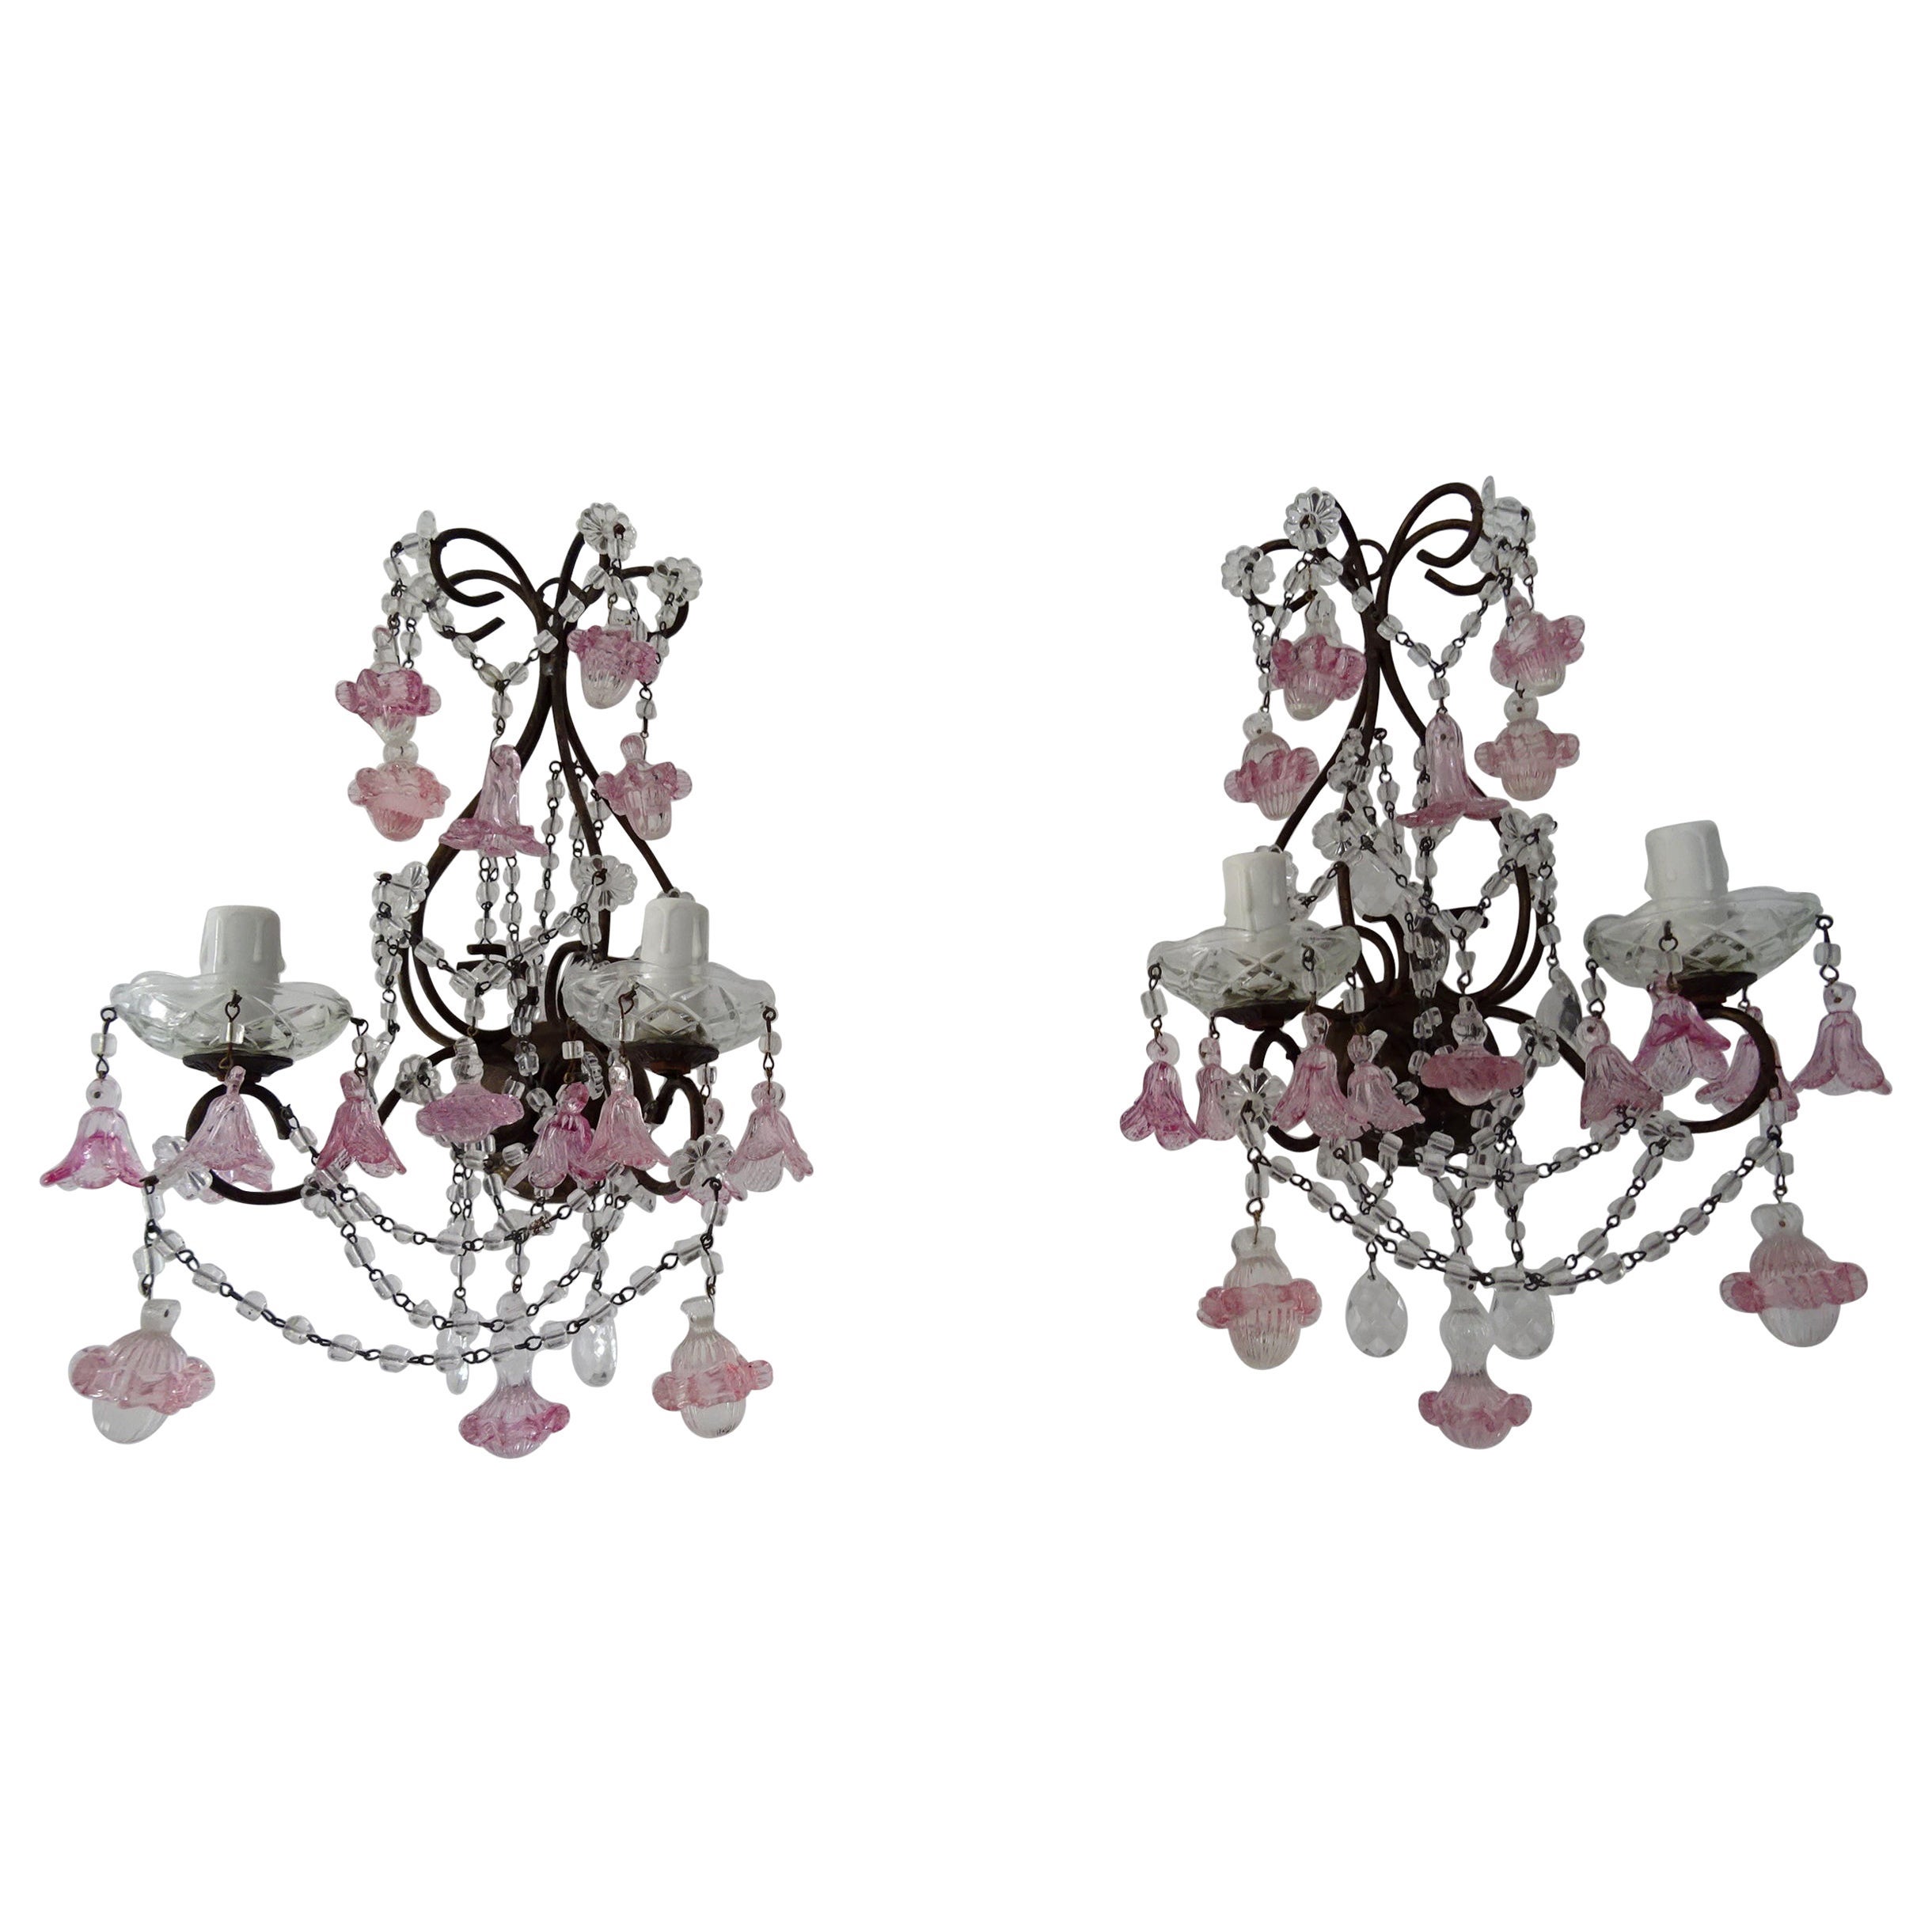 1920 French Pink Fuchsia Murano Balls & Ribbons Giltwood Crystal Prisms Sconces For Sale